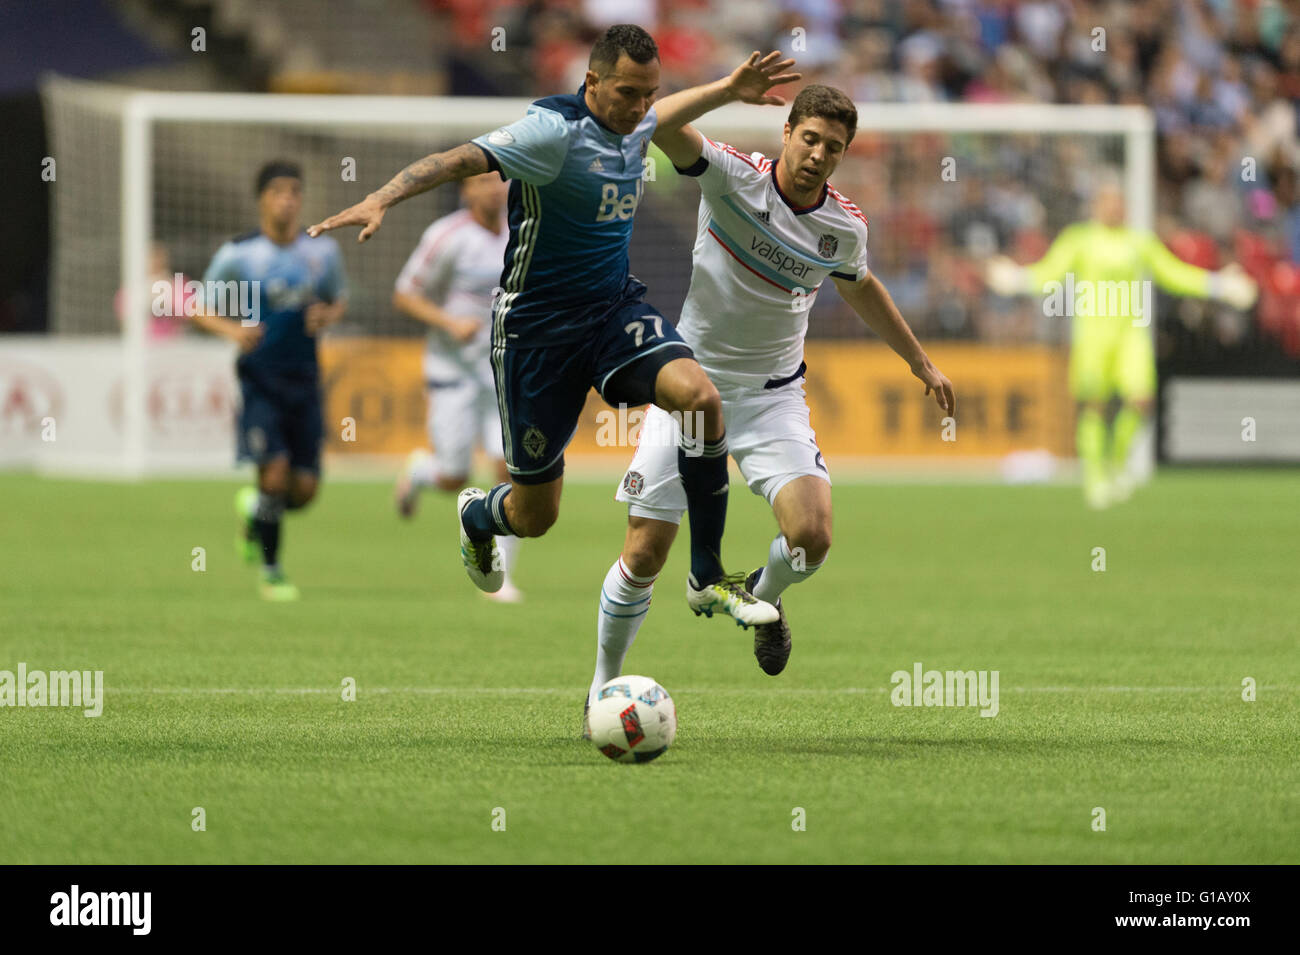 Vancouver, Canada. 11th May, 2016. Vancouver Whitecaps forward Blas Perez (27) fighting to keep the ball. Vancouver Whitecaps vs Chicago Fire, BC Place Stadium. Vancouver wins 2-1.  Credit:  Gerry Rousseau/Alamy Live News Stock Photo